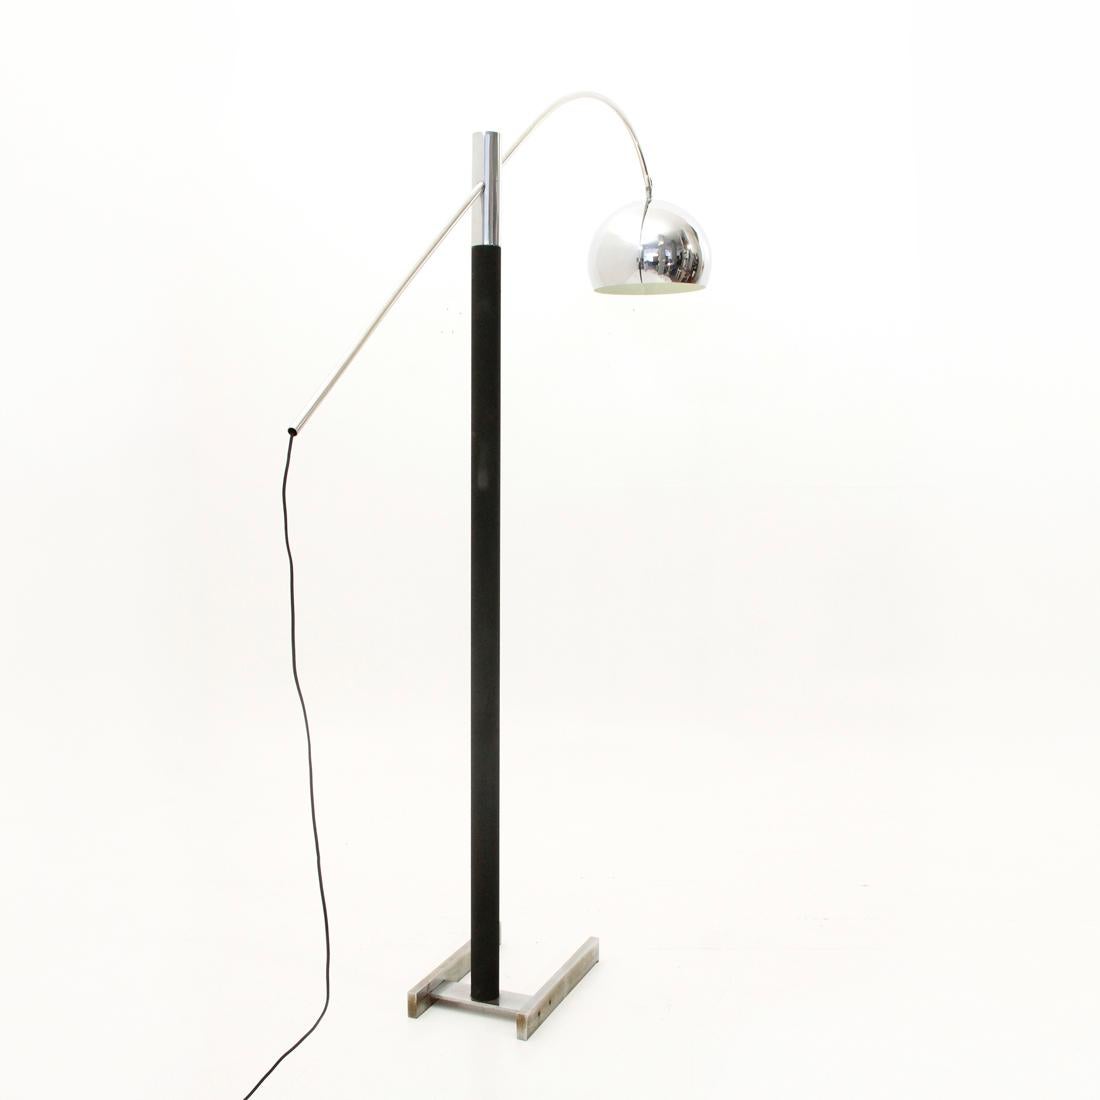 Italian manufactured floor lamp produced in the 1970s.
Base in brushed steel.
Stem in black painted metal.
Stem in chromed metal adjustable in position.
Semi spherical chromed metal diffuser.
Good general conditions, some signs due to normal